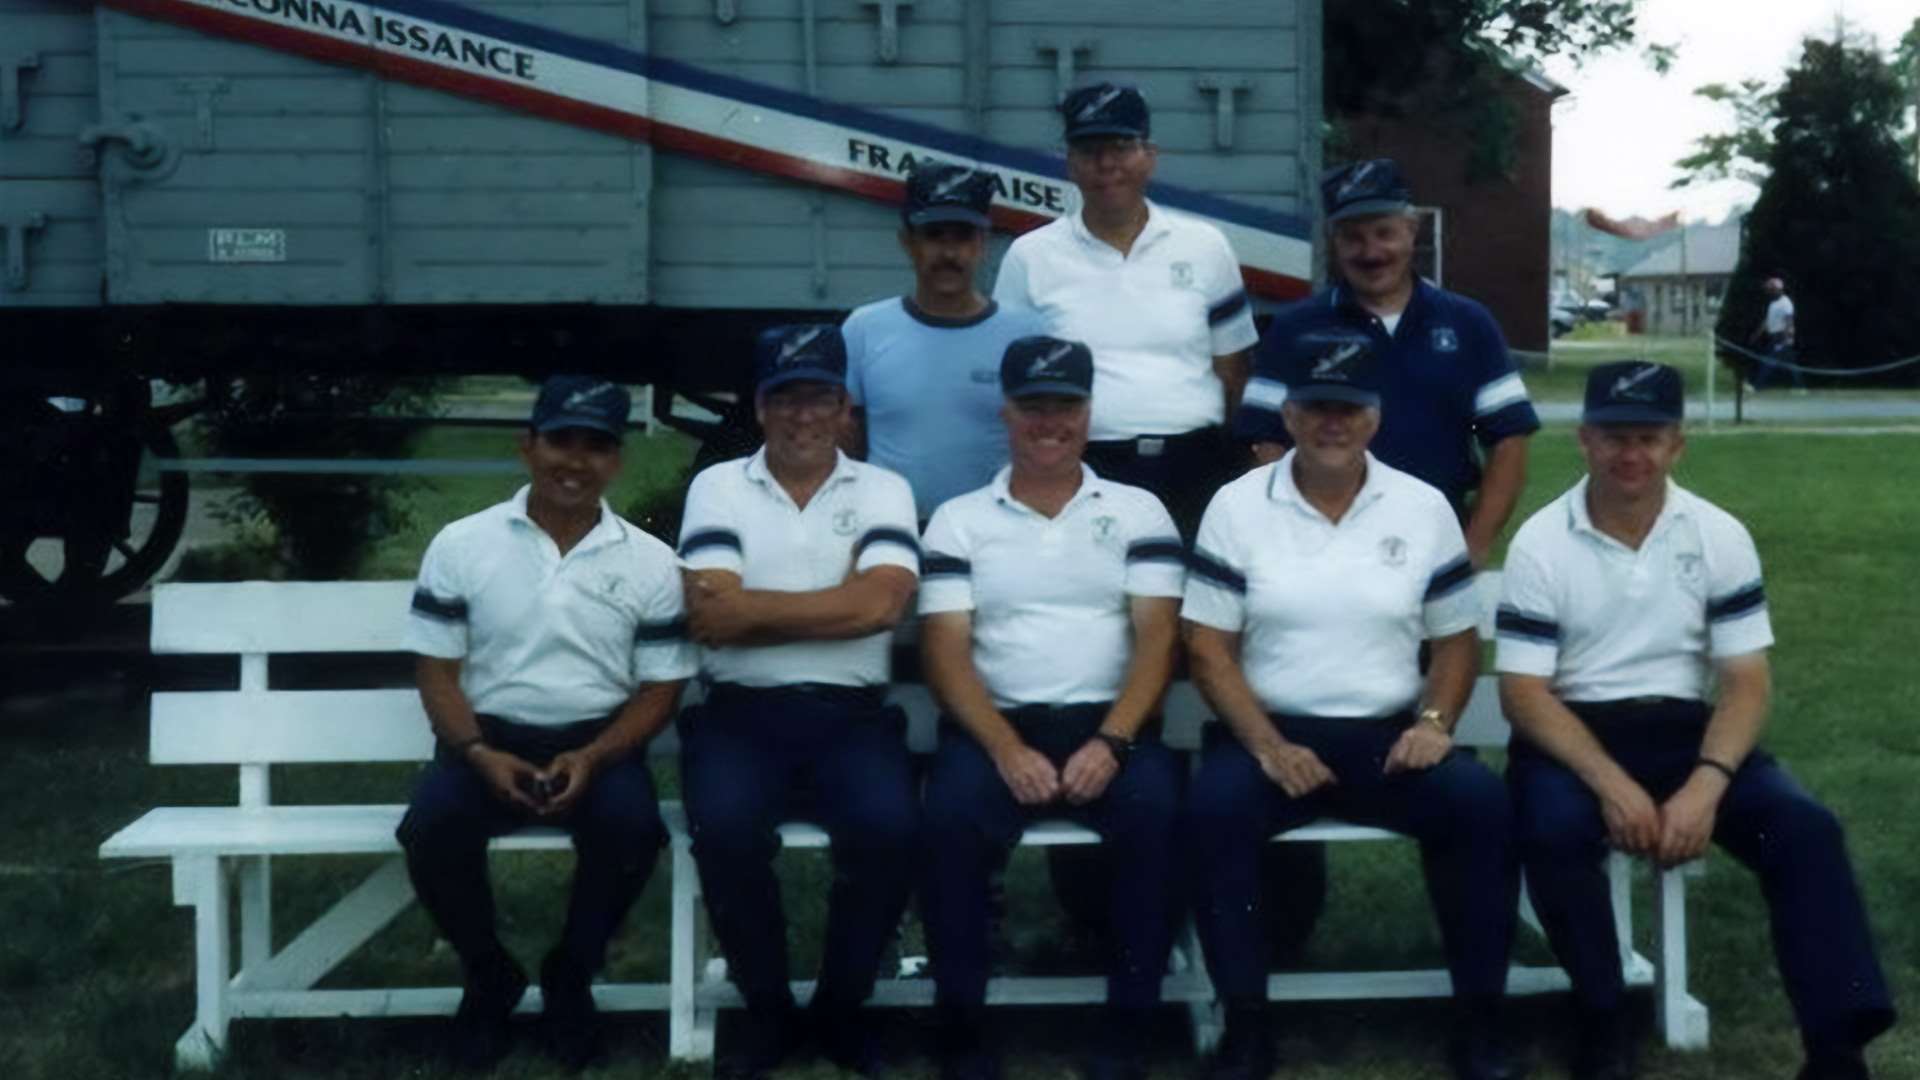 1988 US Air Force Pistol Team at Camp Perry